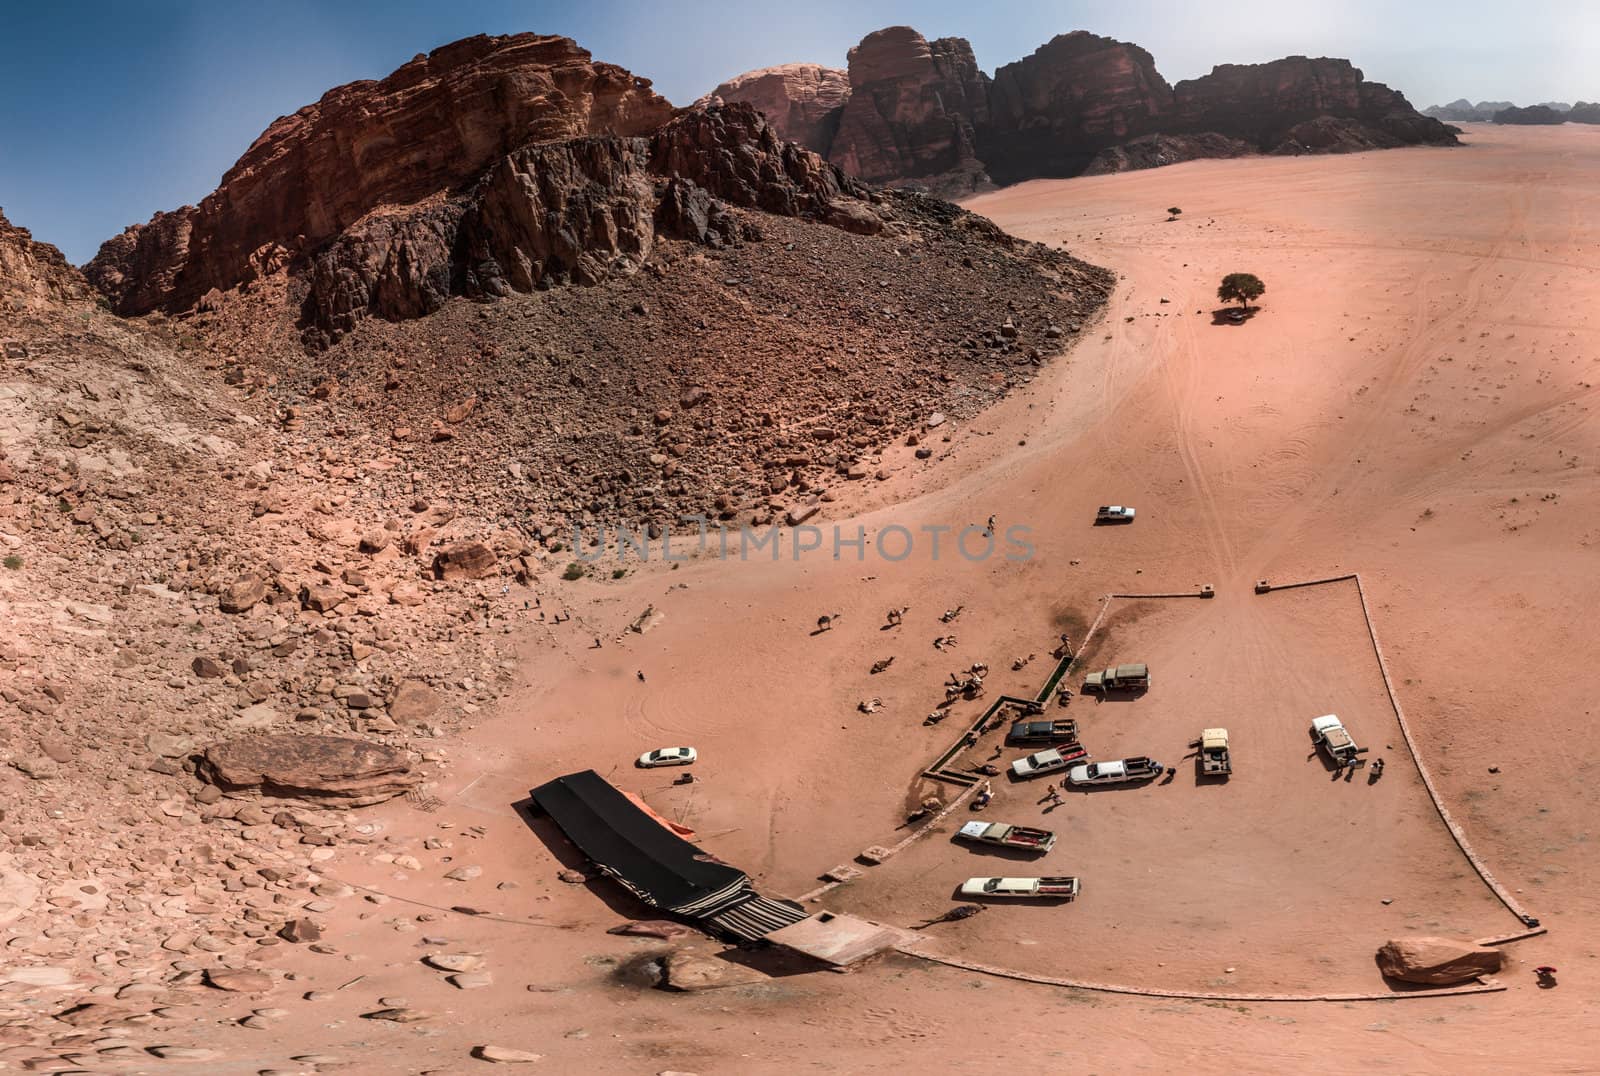 Aerial view of the Lawrence spring in the Jordanian desert near Wadi Rum, made with drone